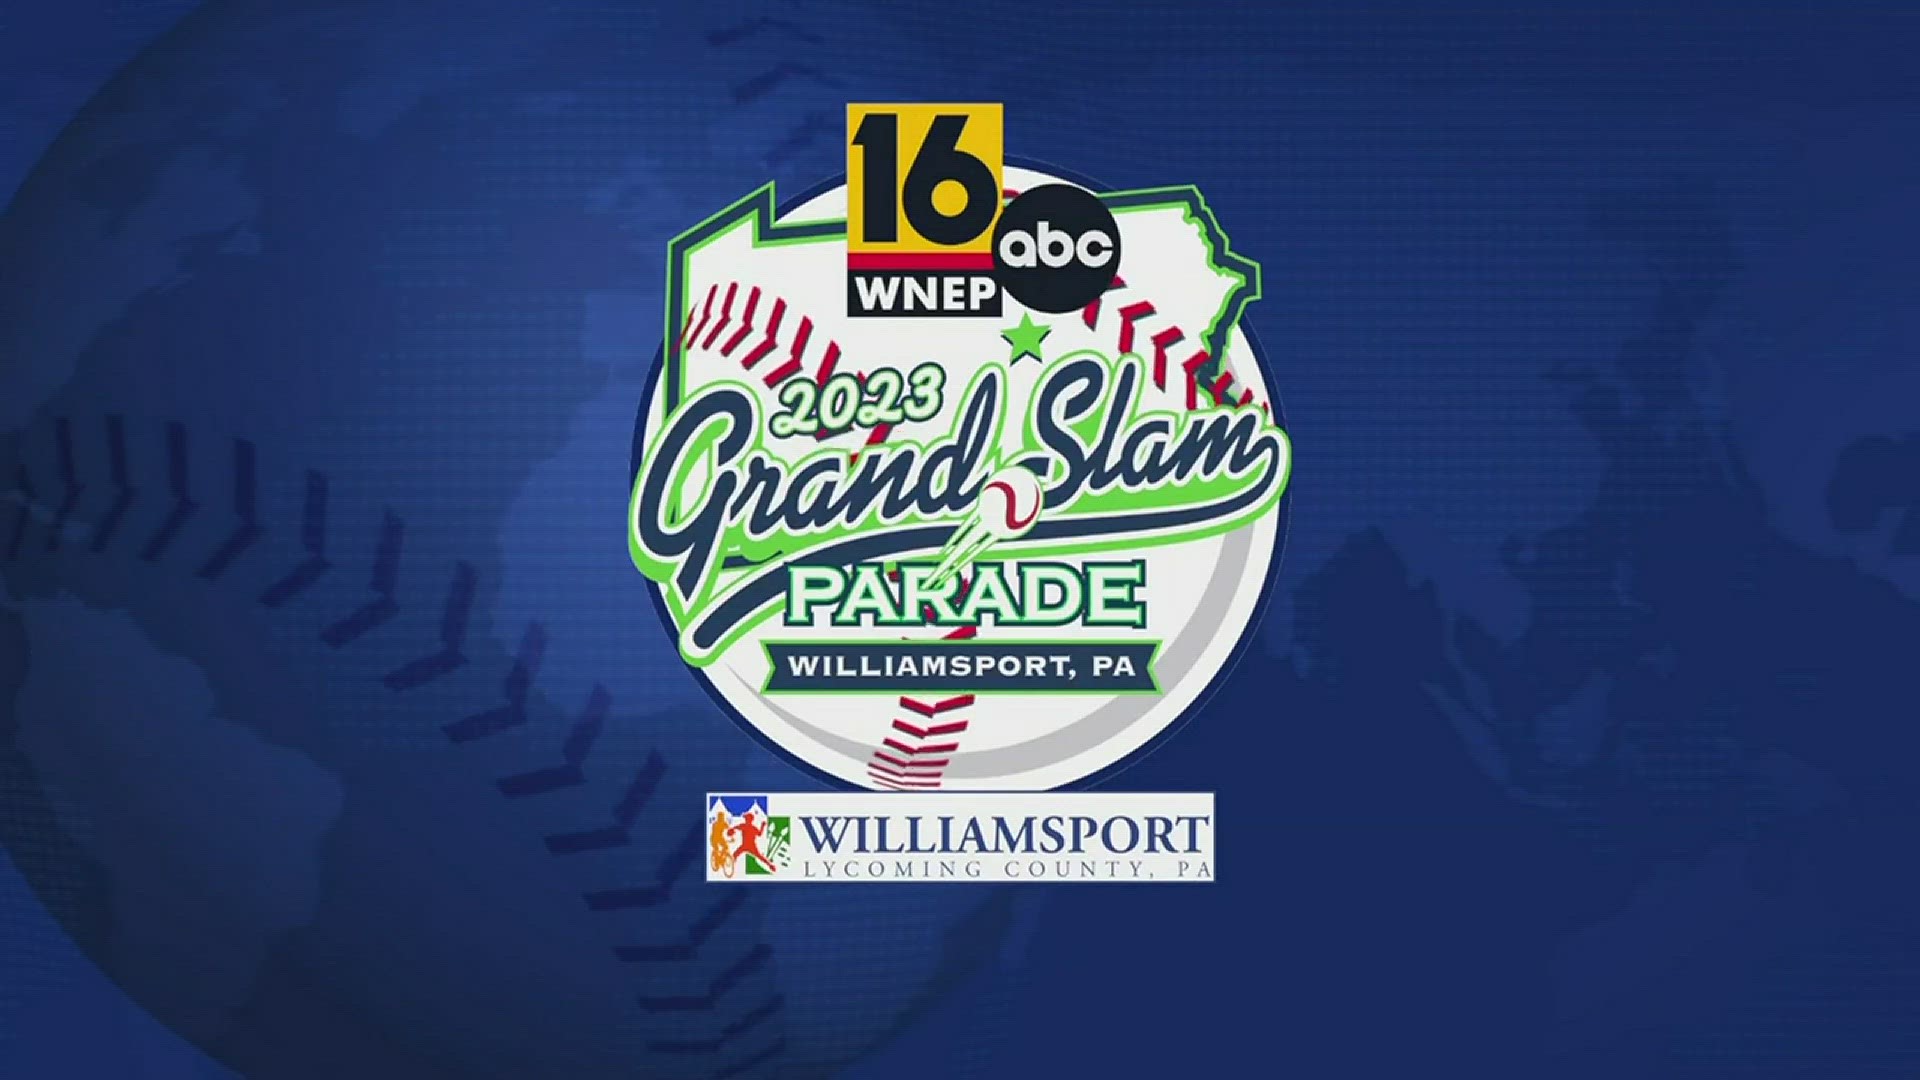 Williamsport welcomes the world for the 2023 Grand Slam Parade!  Meet the 20 teams from the US and around the globe playing in this year's Little League World Series